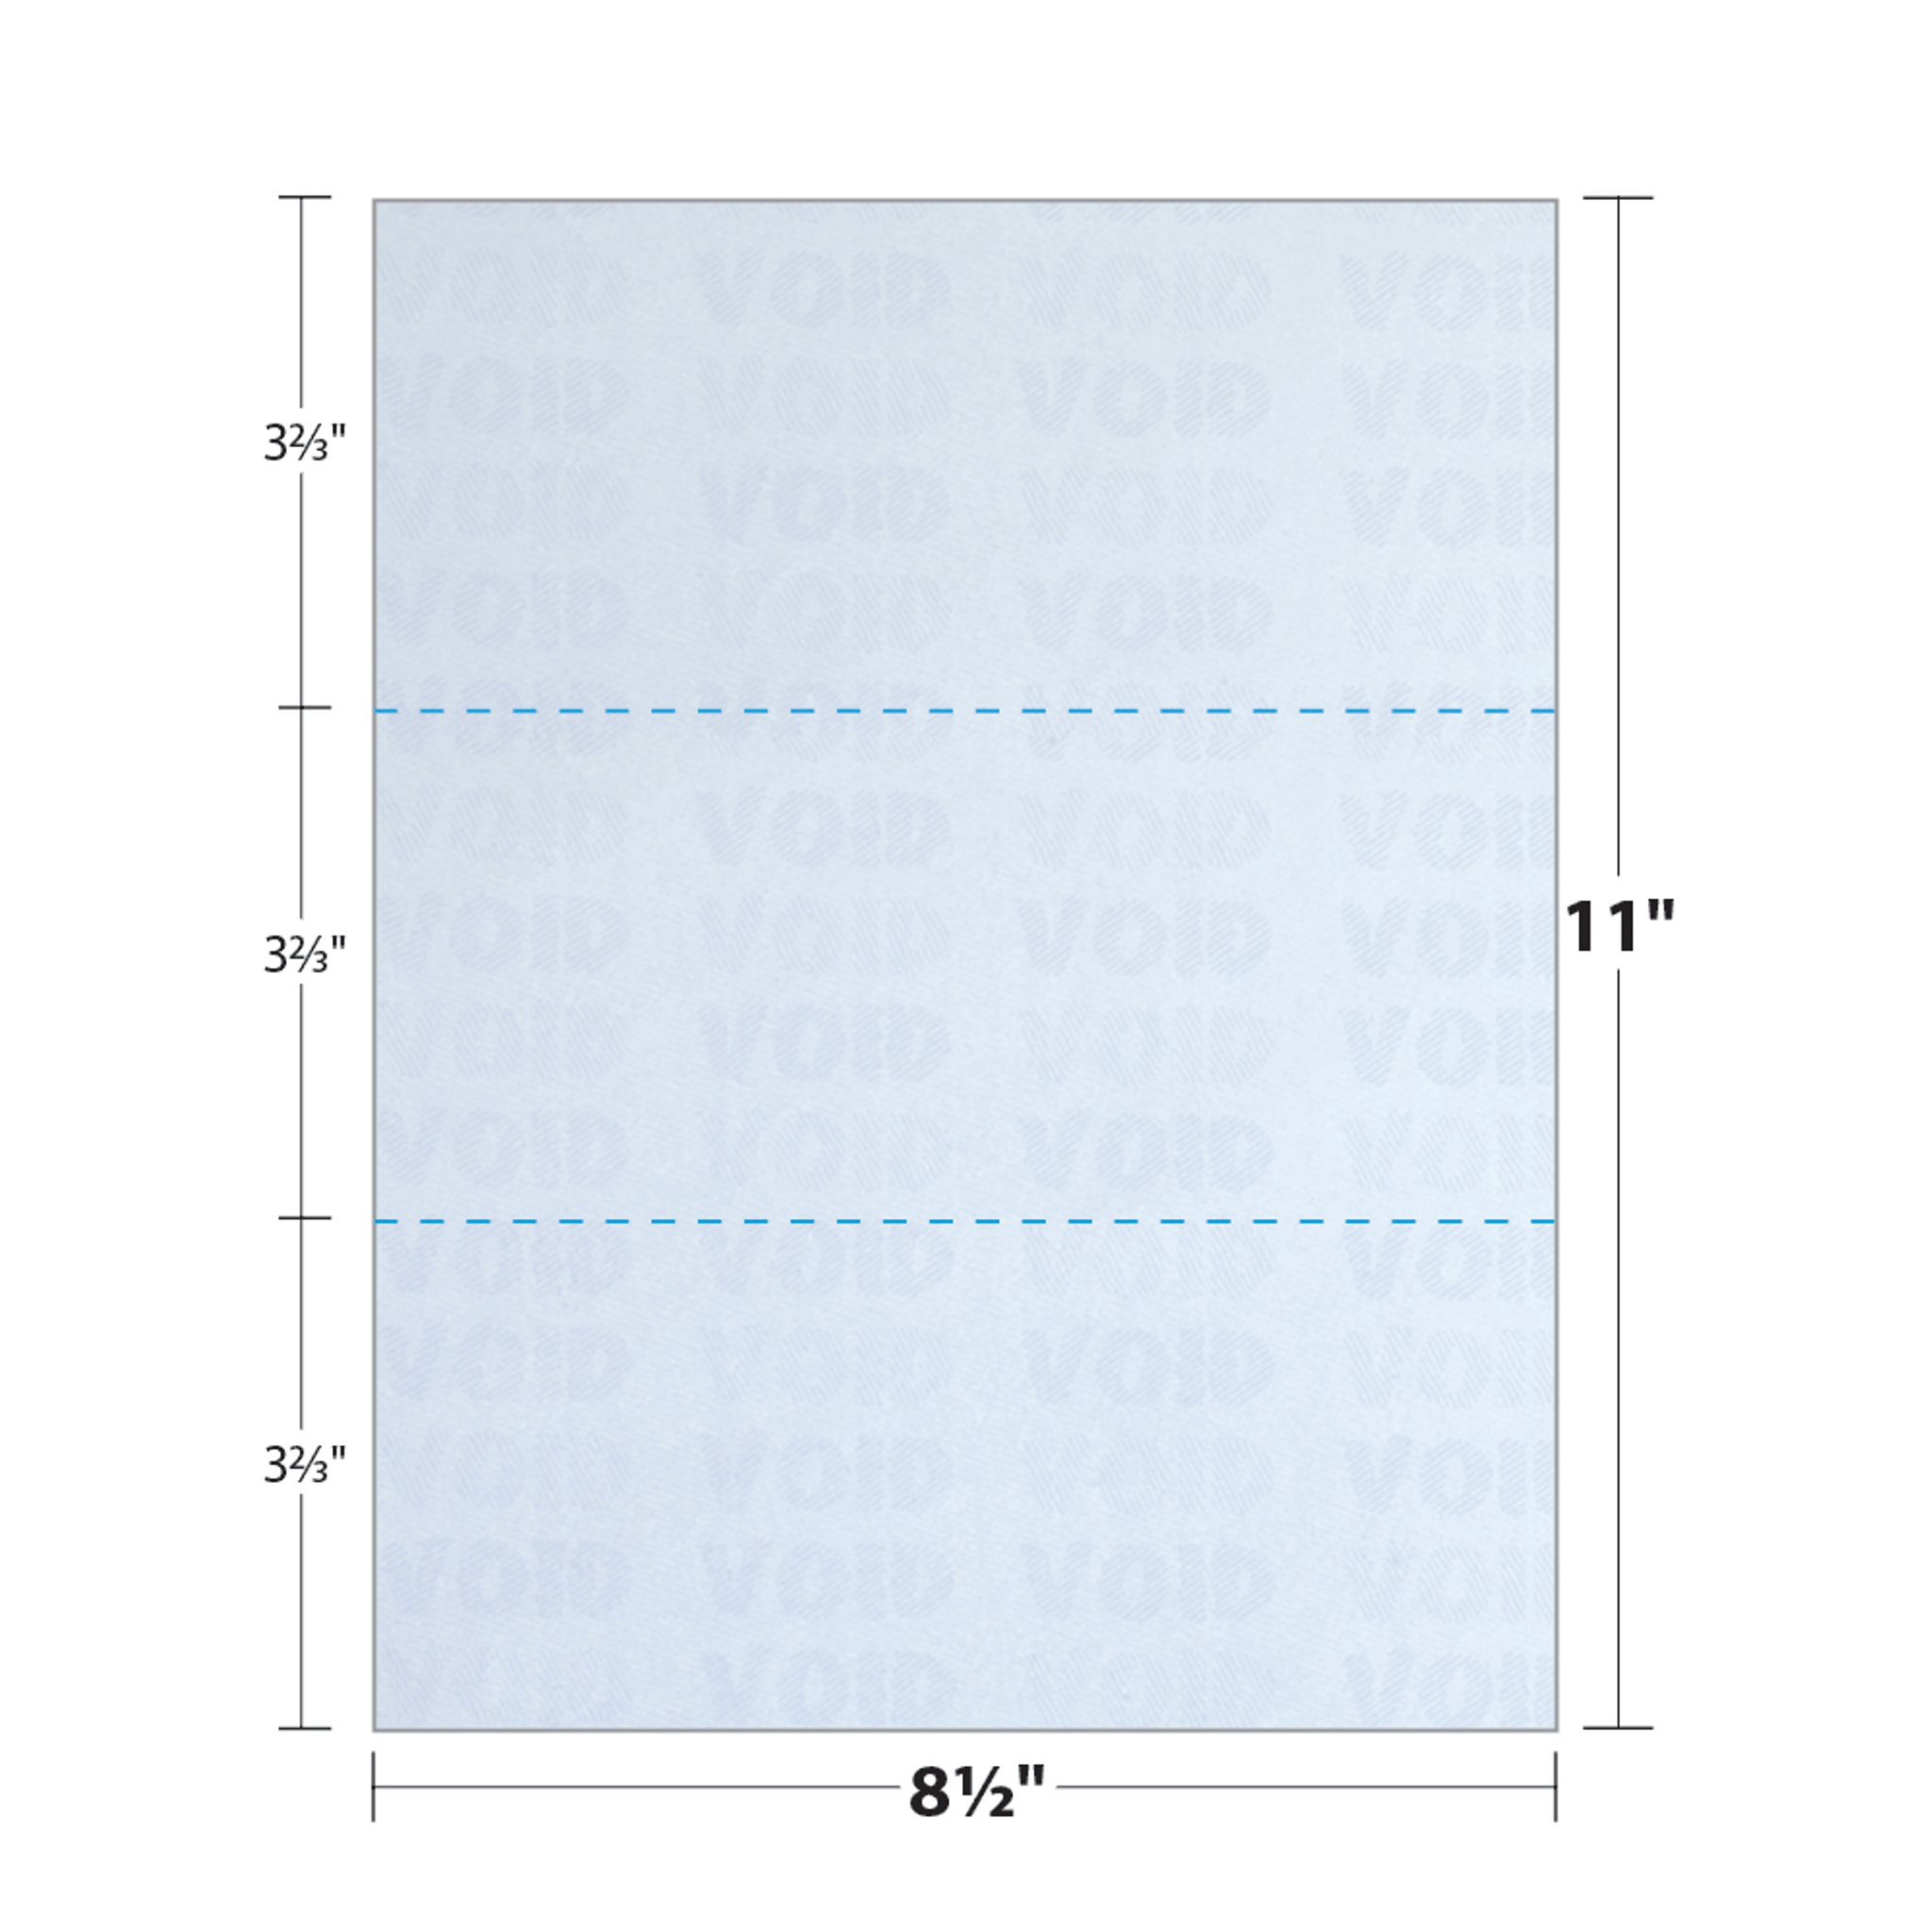 Security Paper Perforated in Thirds | PFA25K6VBL | Blanks/USA